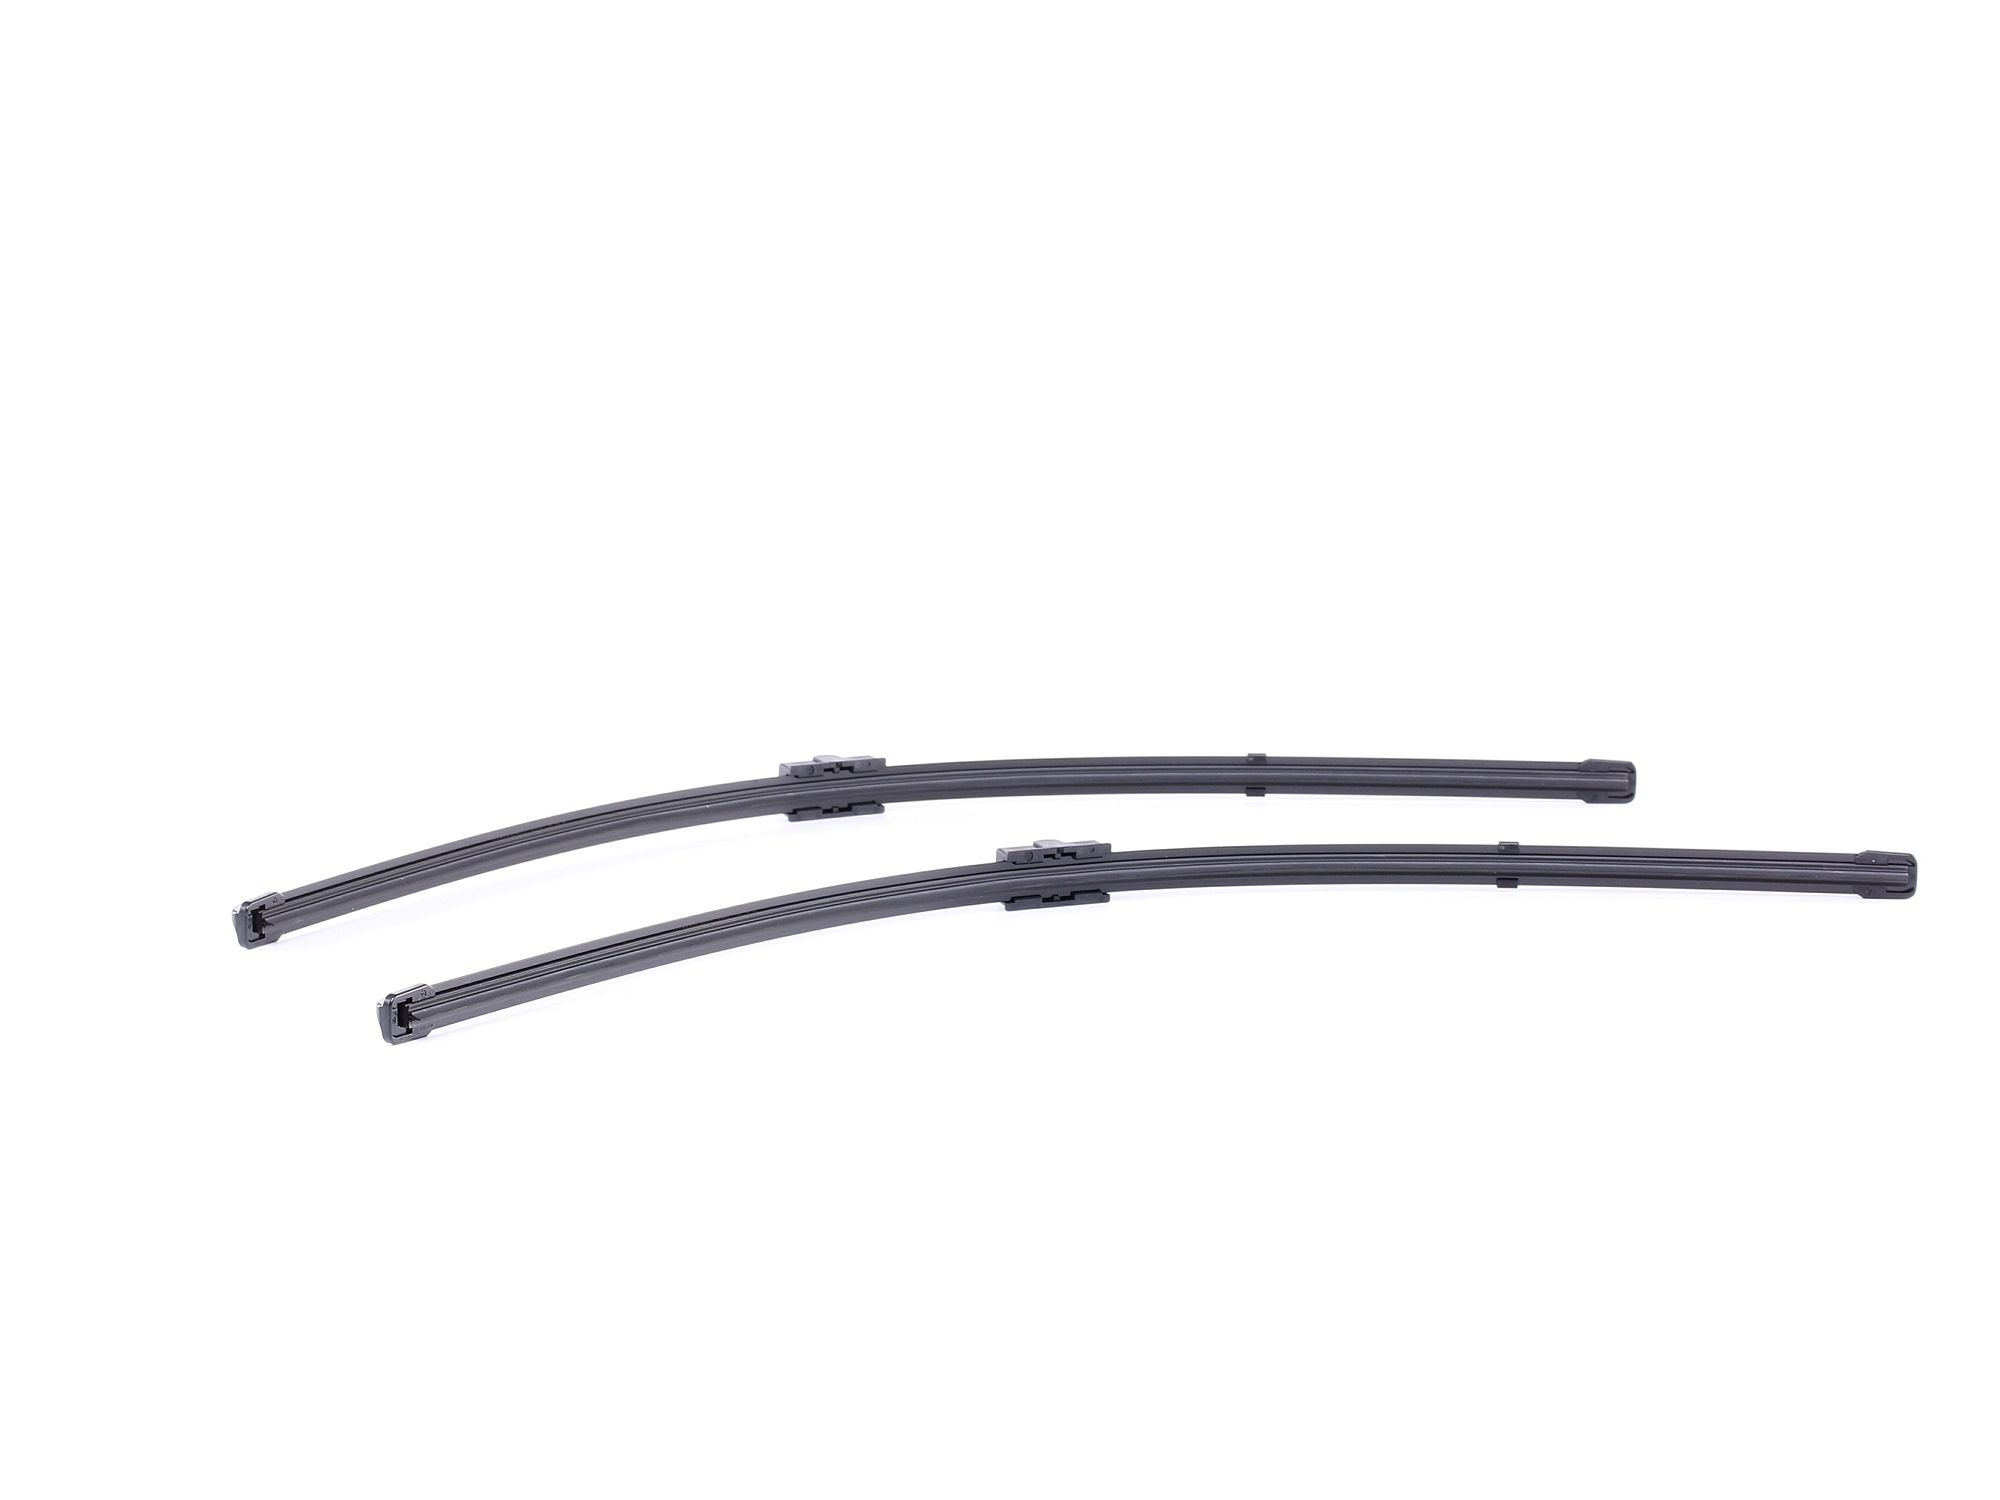 Buy Wiper blade SWF 119381 - Wipers system parts VW TOUAREG online